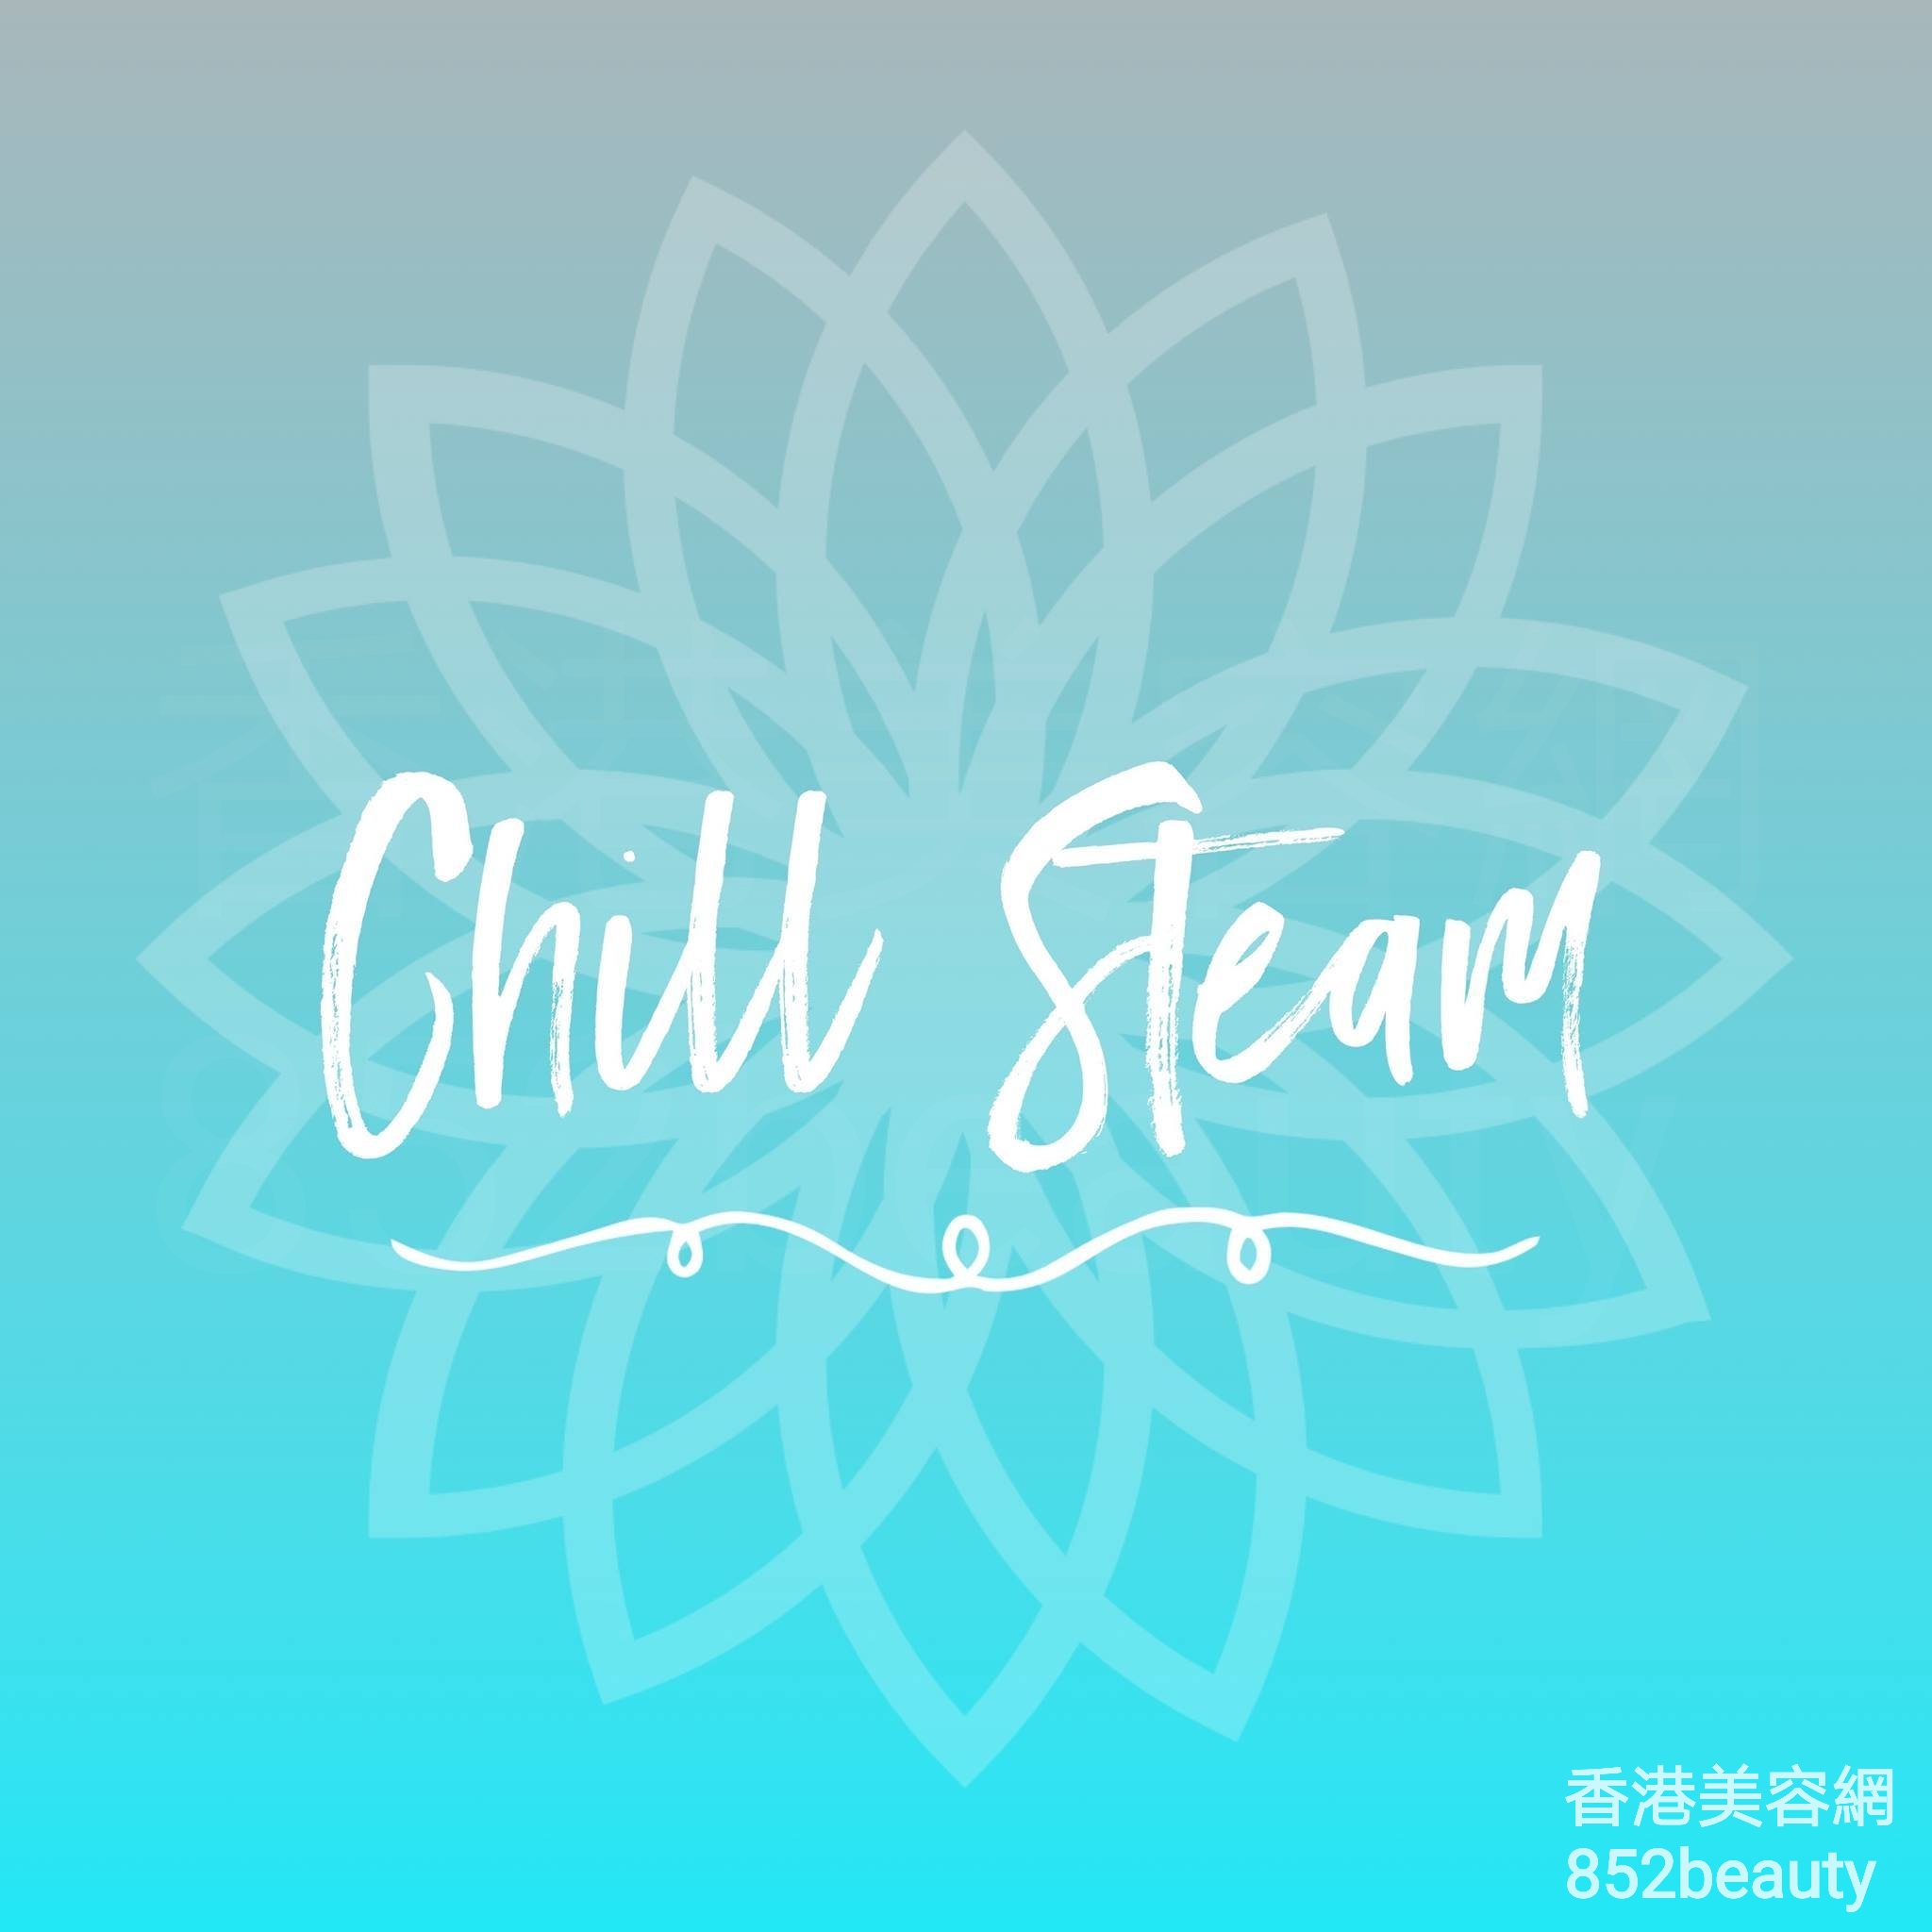 Hand and foot care: Chill Steam